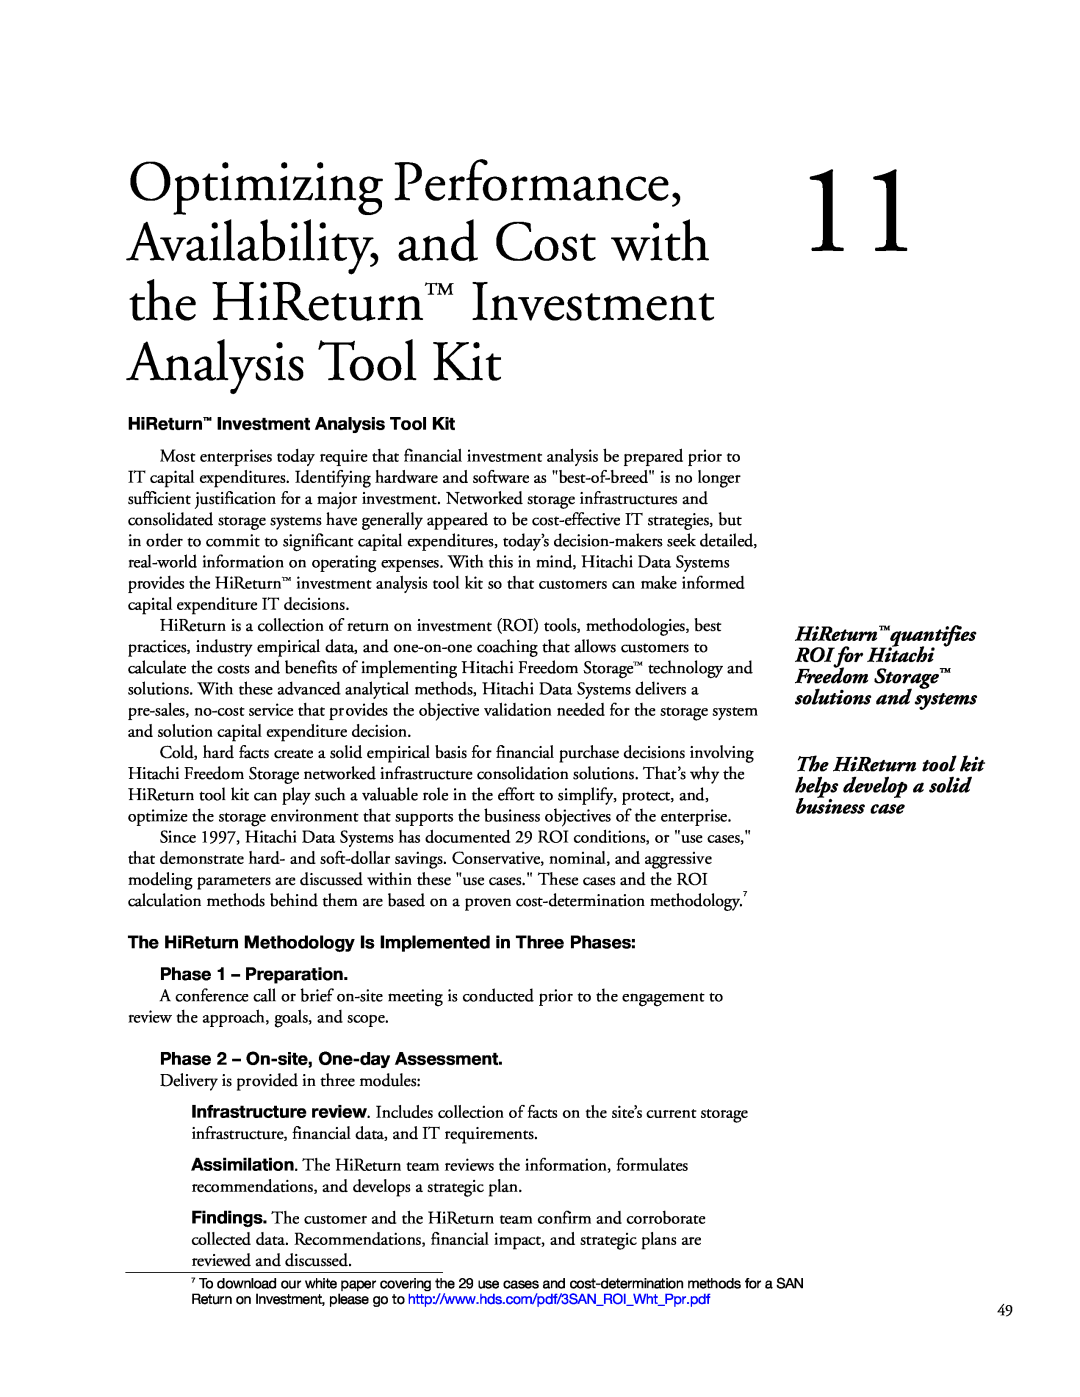 Hitachi 9900 manual Optimizing Performance, Availability, and Cost with, the HiReturn Investment Analysis Tool Kit 